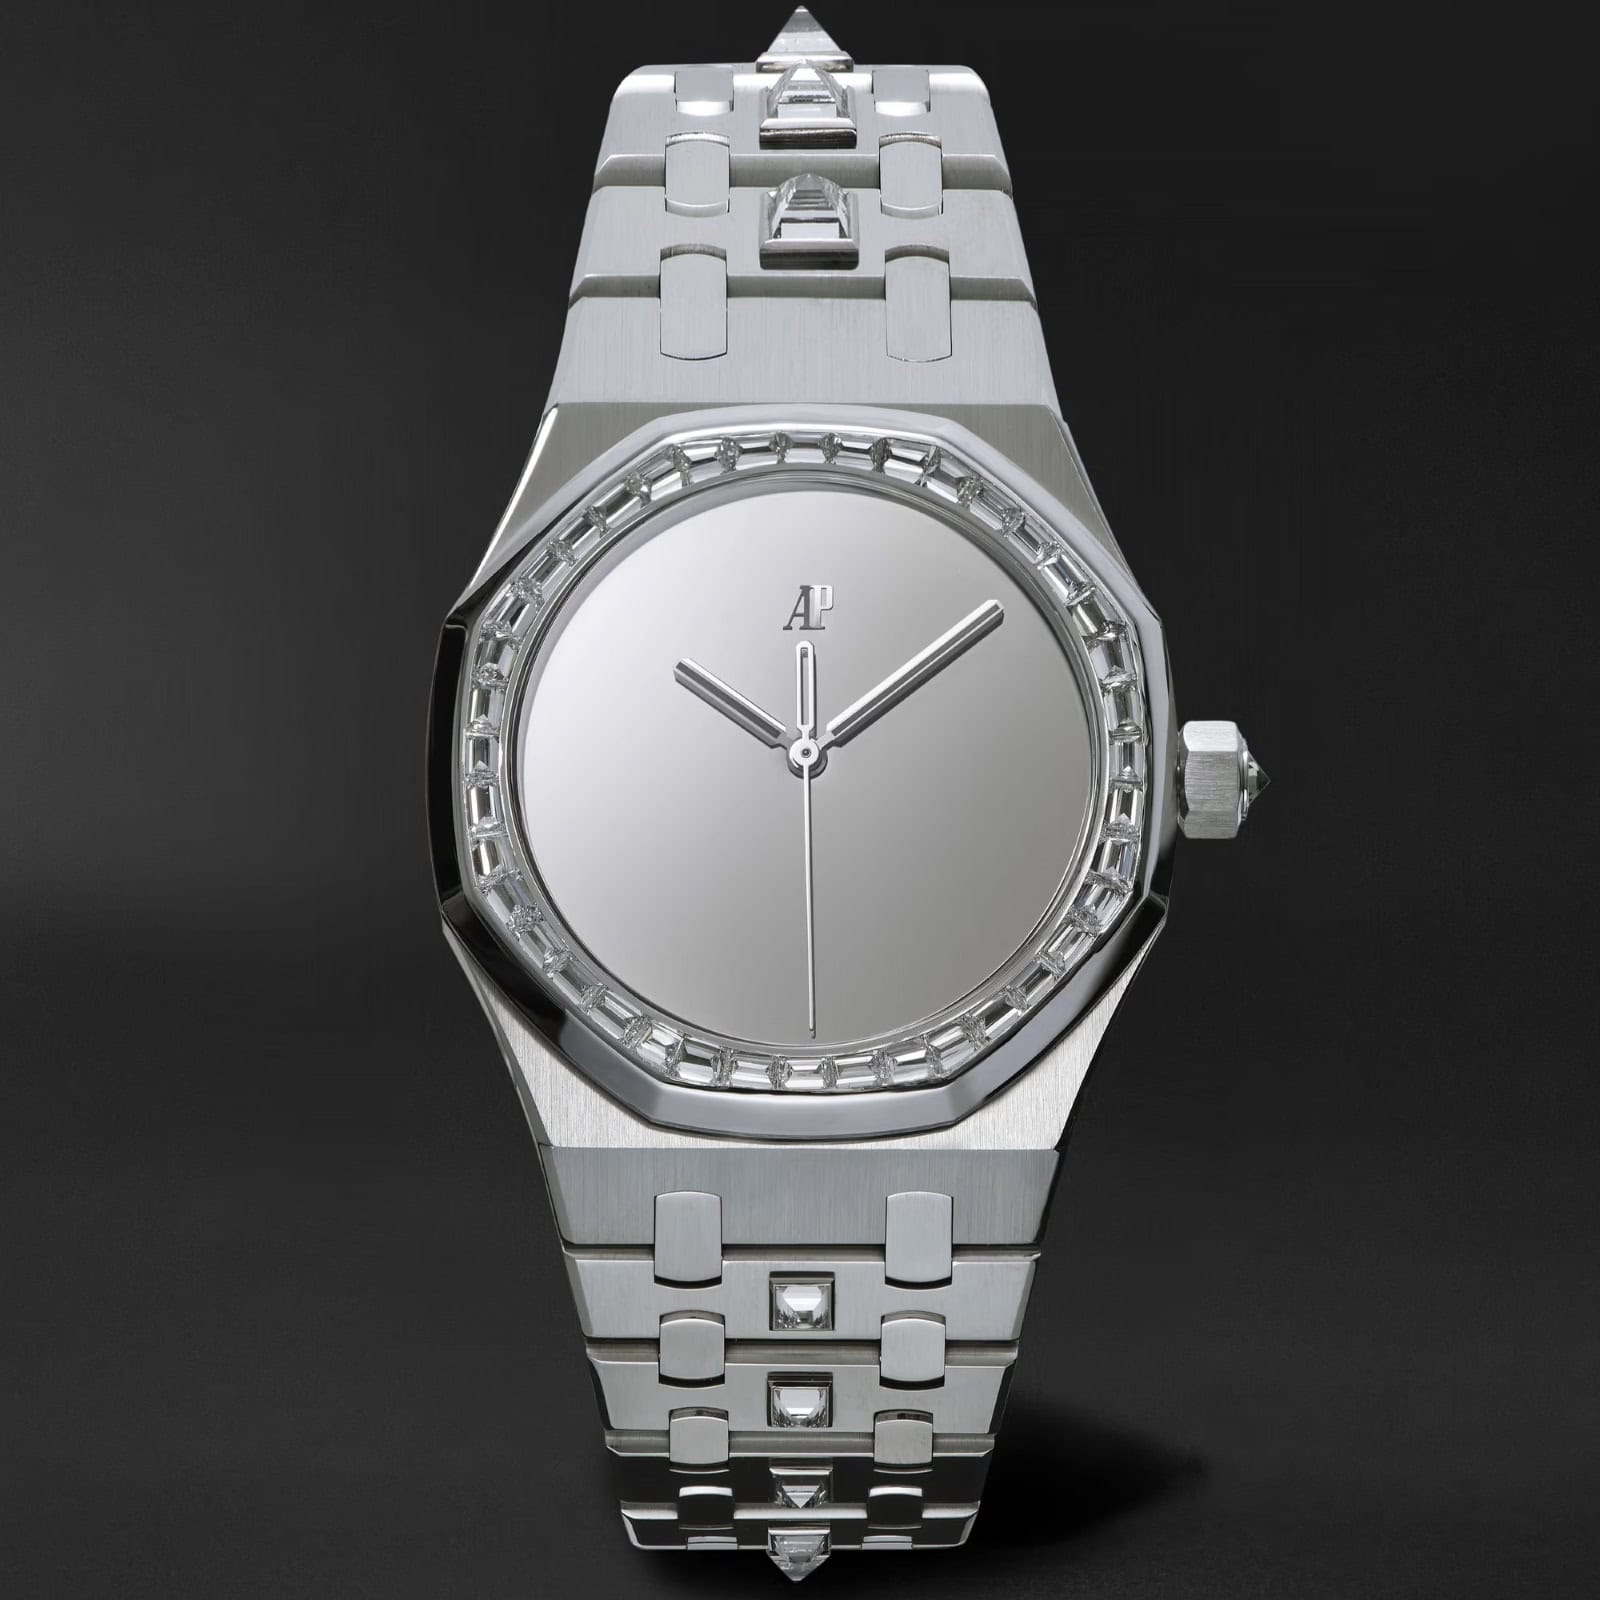 Hatton Labs Royal Oak Limited Edition Automatic 37mm Stainless Steel and Diamond Watch, Ref. No. MDHT001